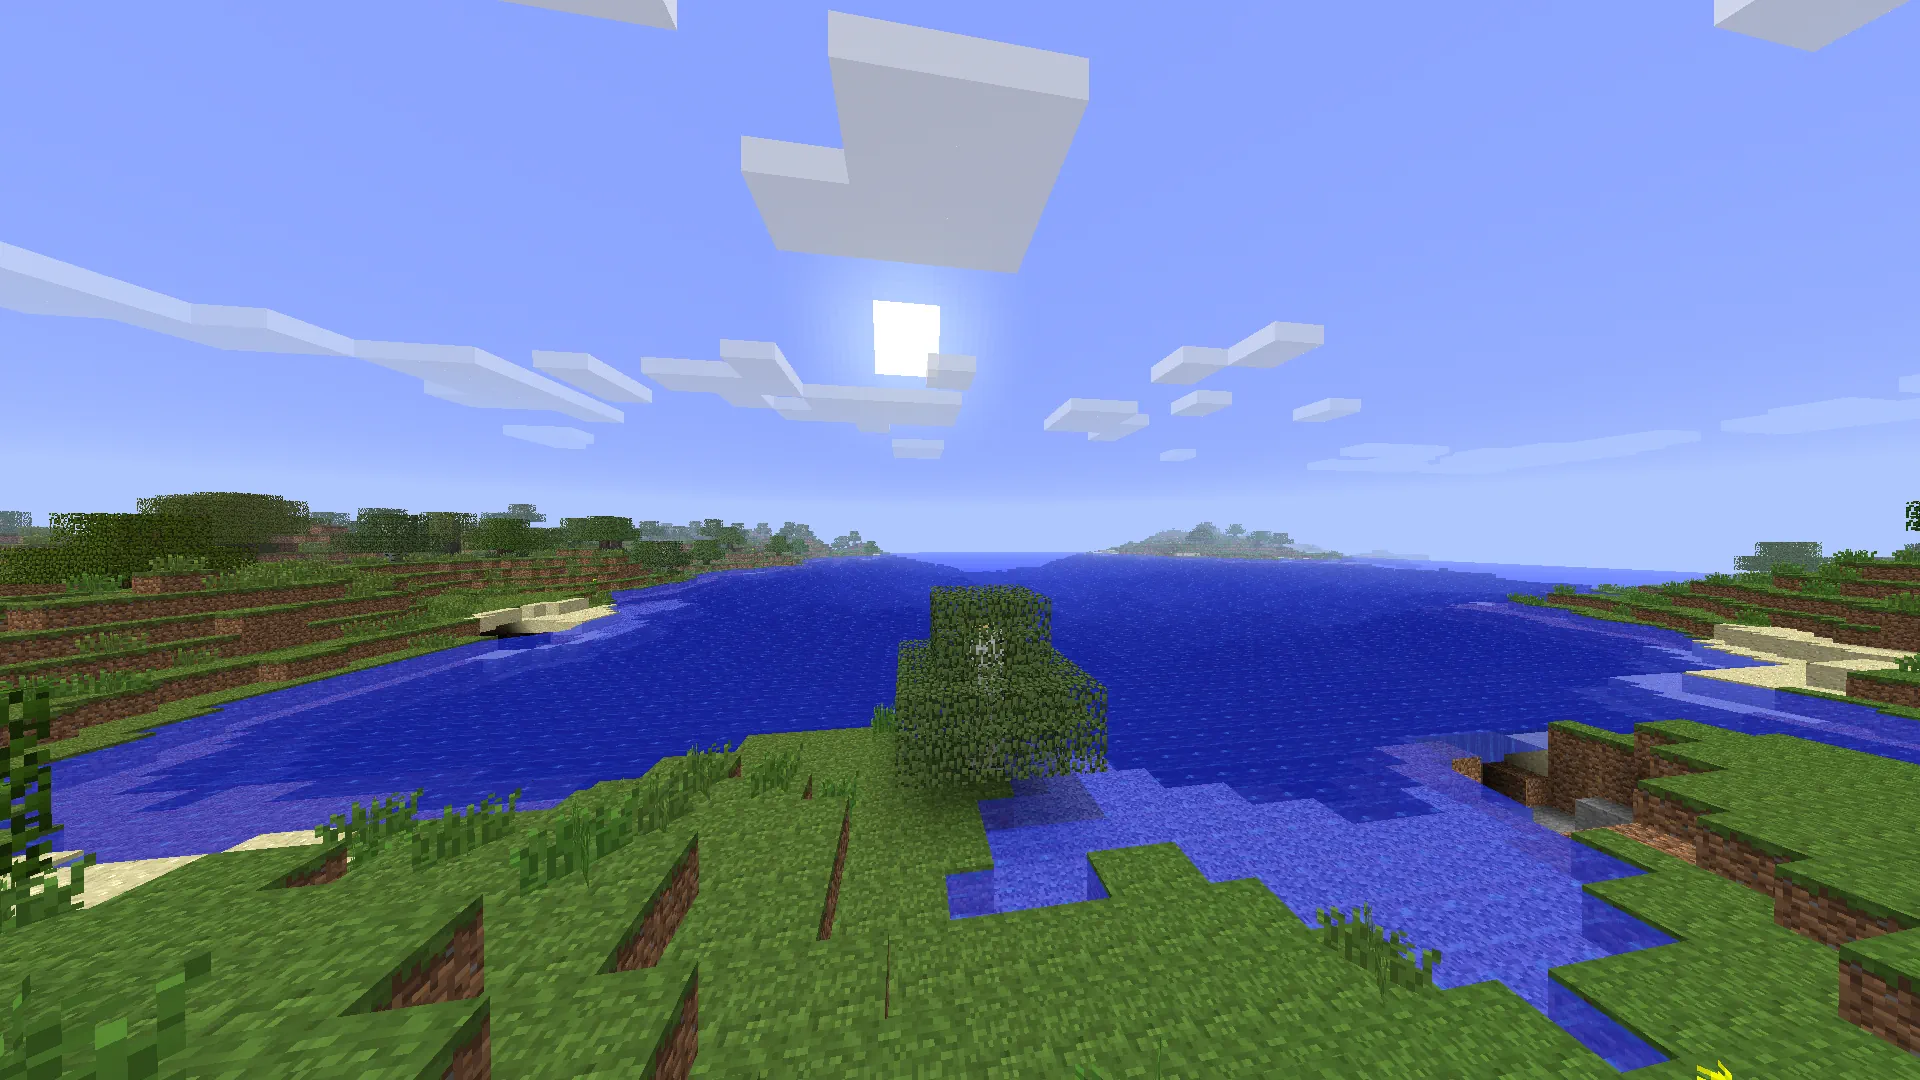 Minecraft landscape with trees, caves, flowers, shrubs and an ocean.